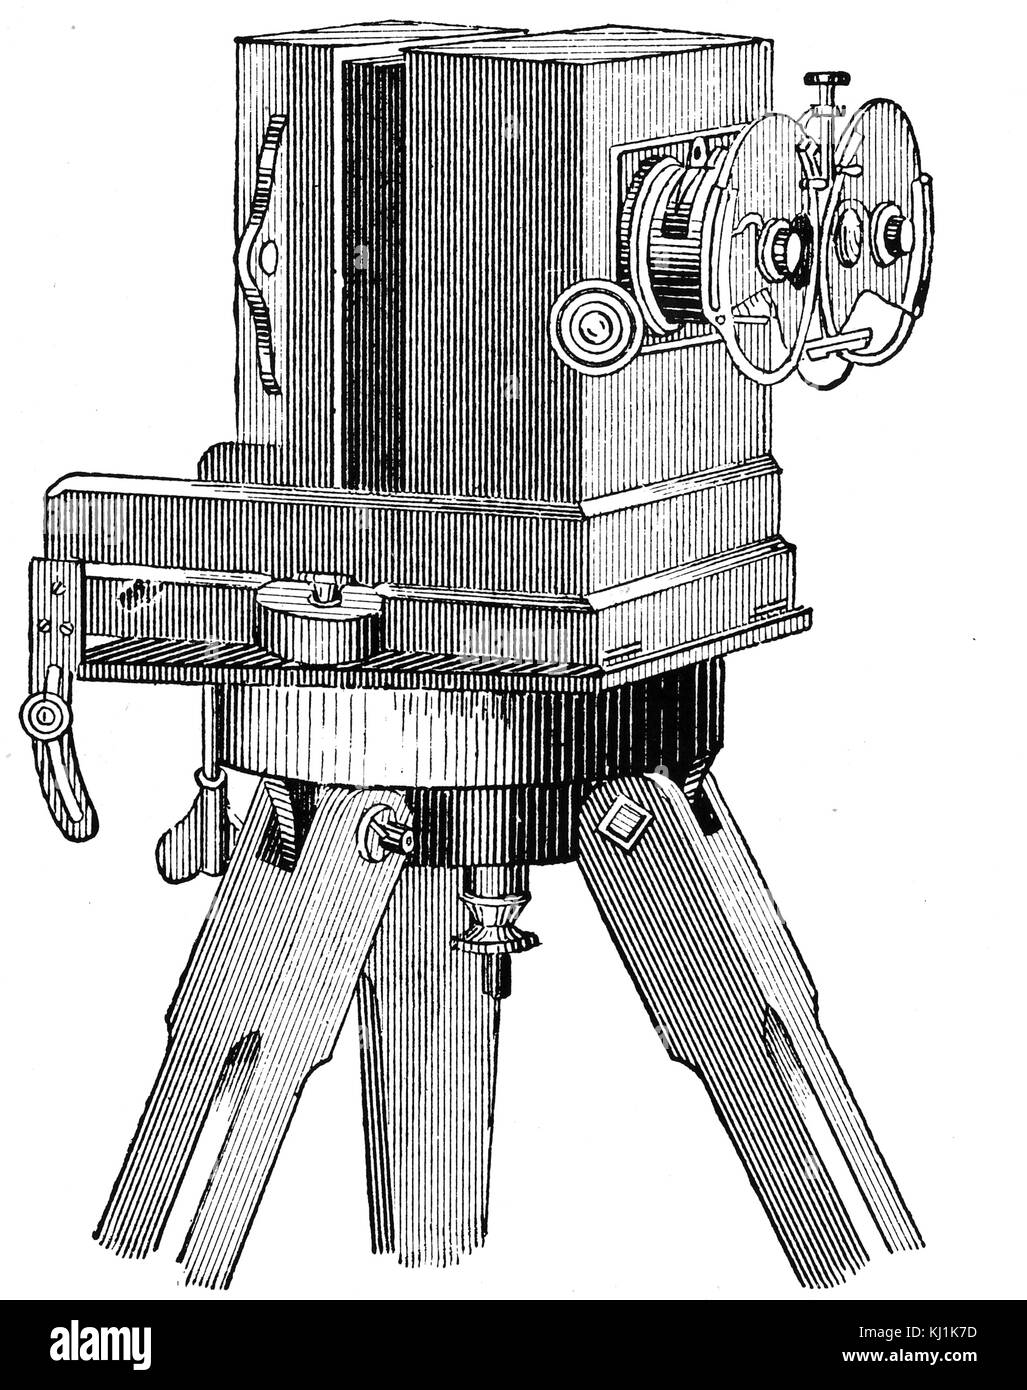 Engraving depicting an early stereoscopic camera mounted on a tripod. This type of camera has two or more lenses with a separate image sensor or film frame for each lens. Dated 19th Century Stock Photo